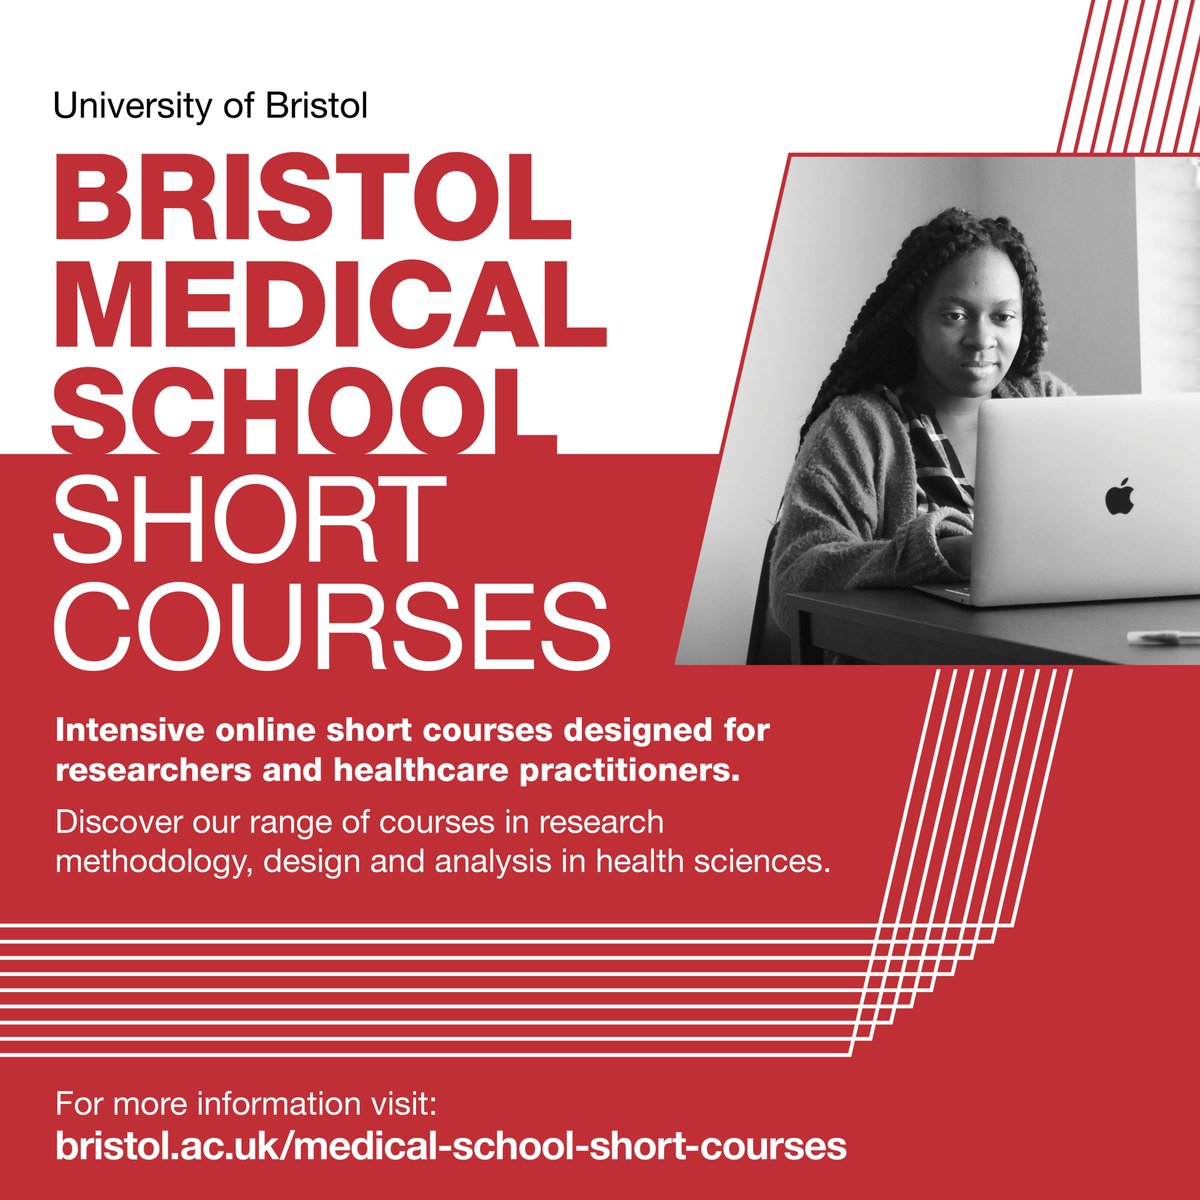 Online training opportunities with subject specialists at Bristol Medical School - update your knowledge on topics like disease modelling, bioethics, economic evaluation and medical statistics.